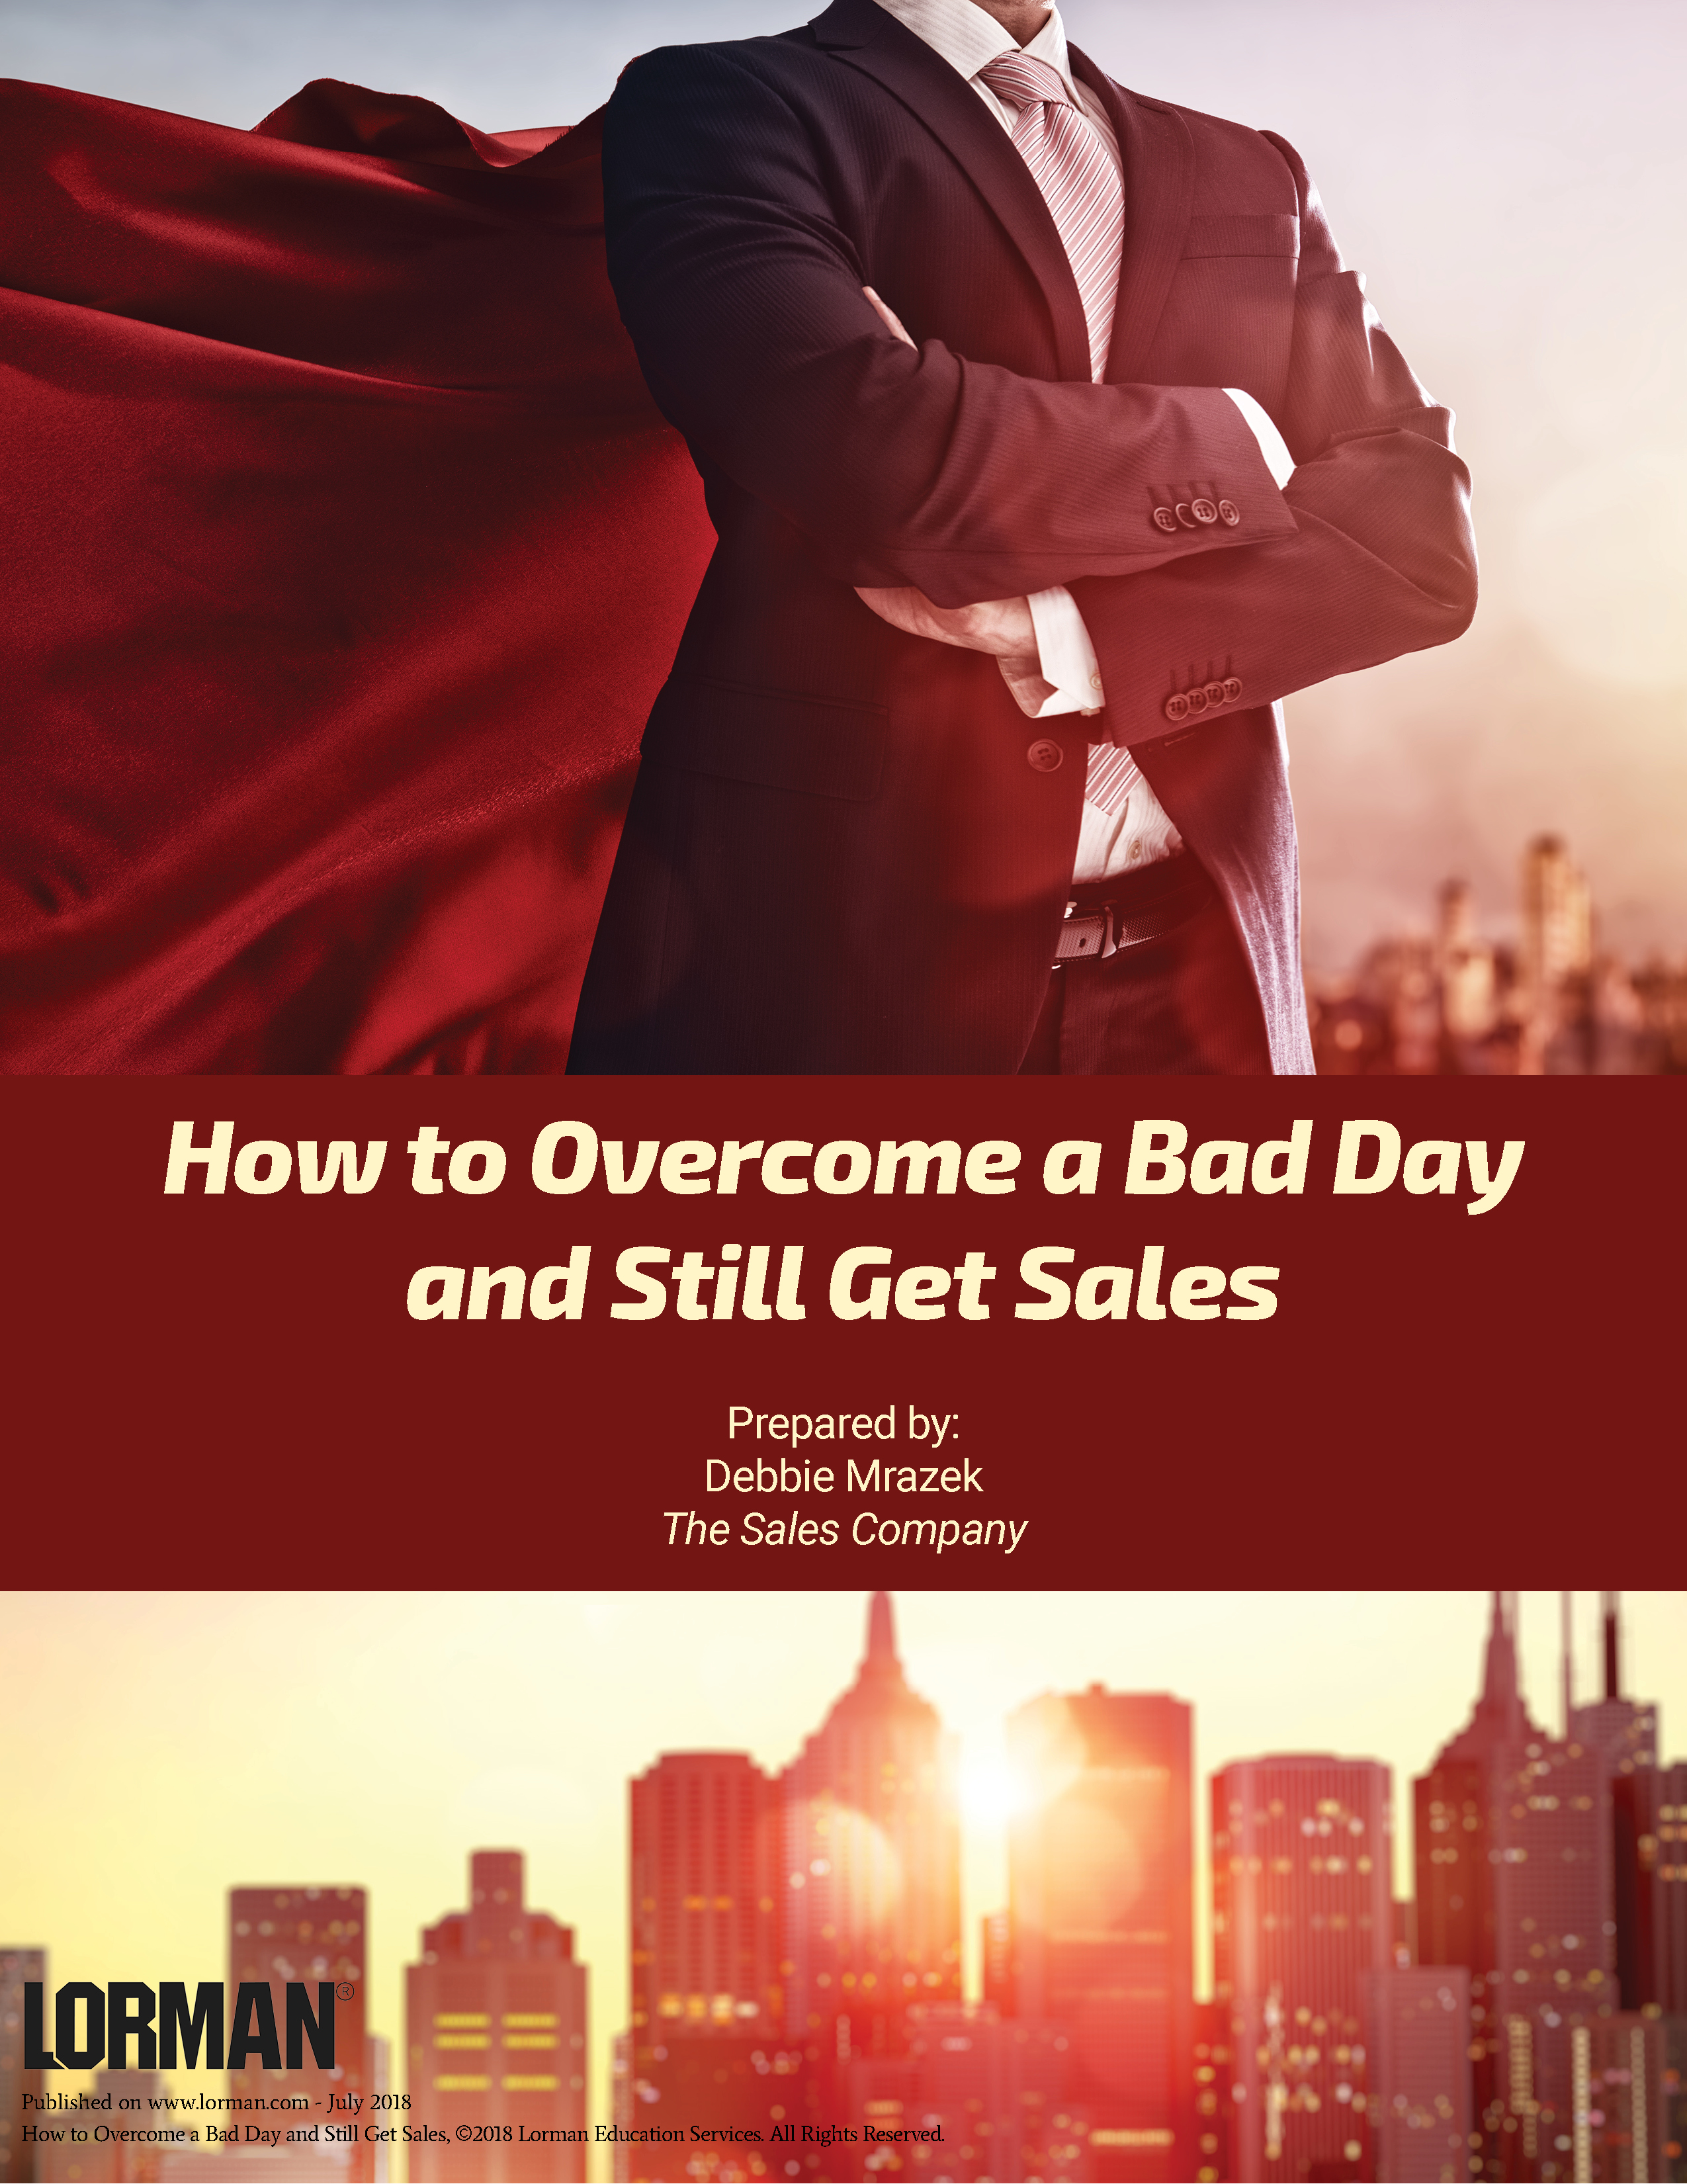 How to Overcome a Bad Day and Still Get Sales